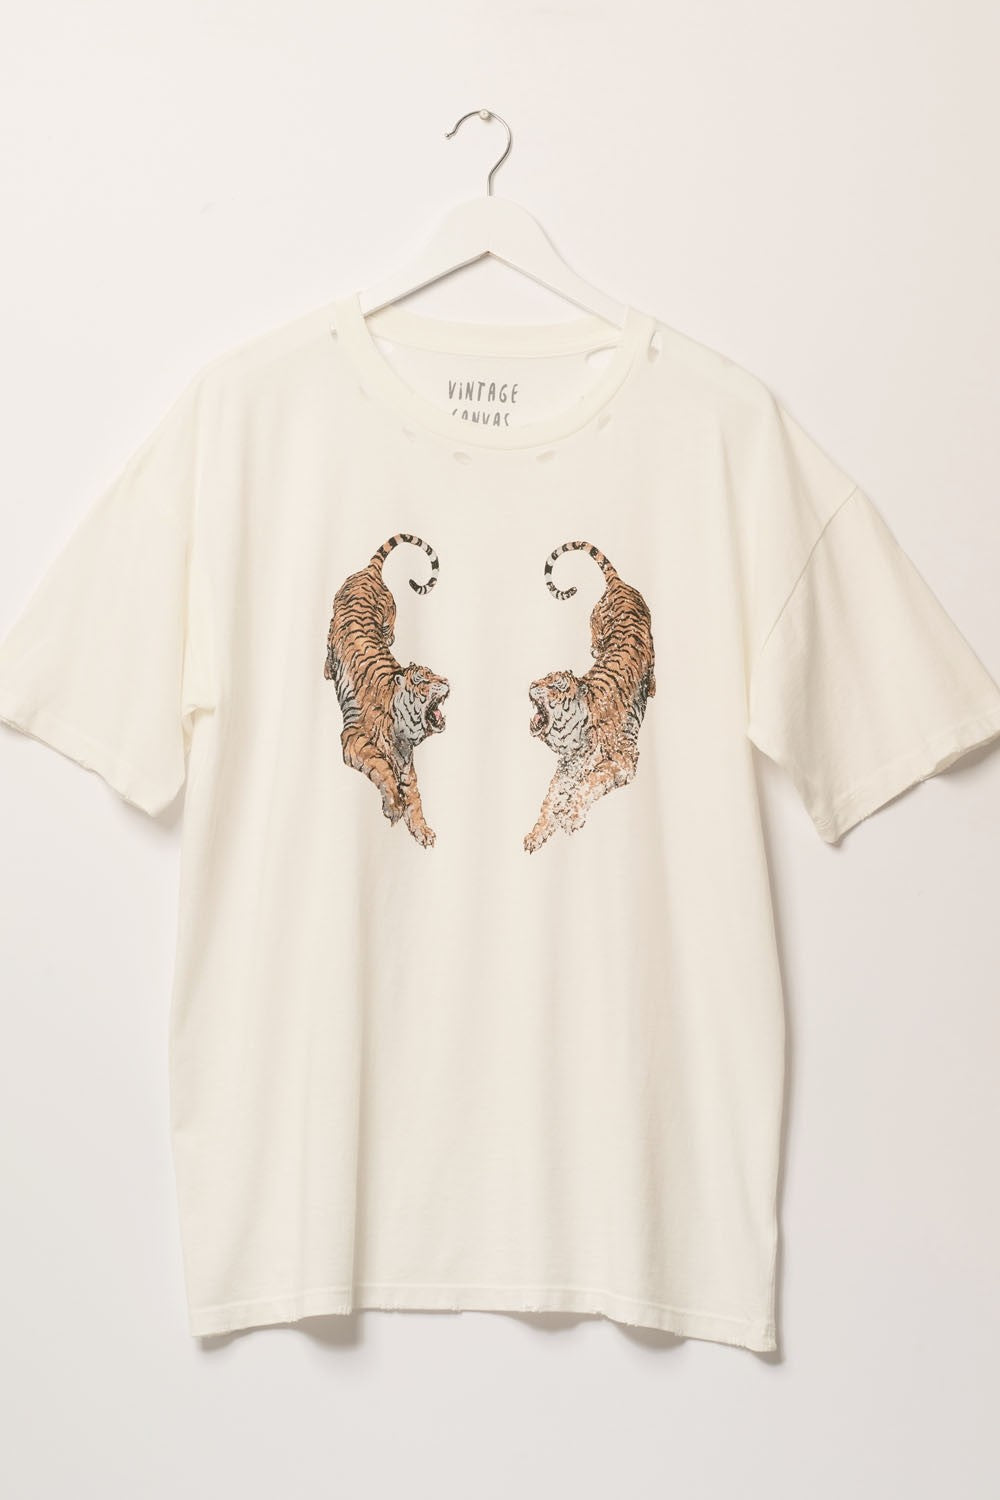 the tiger love graphic tee